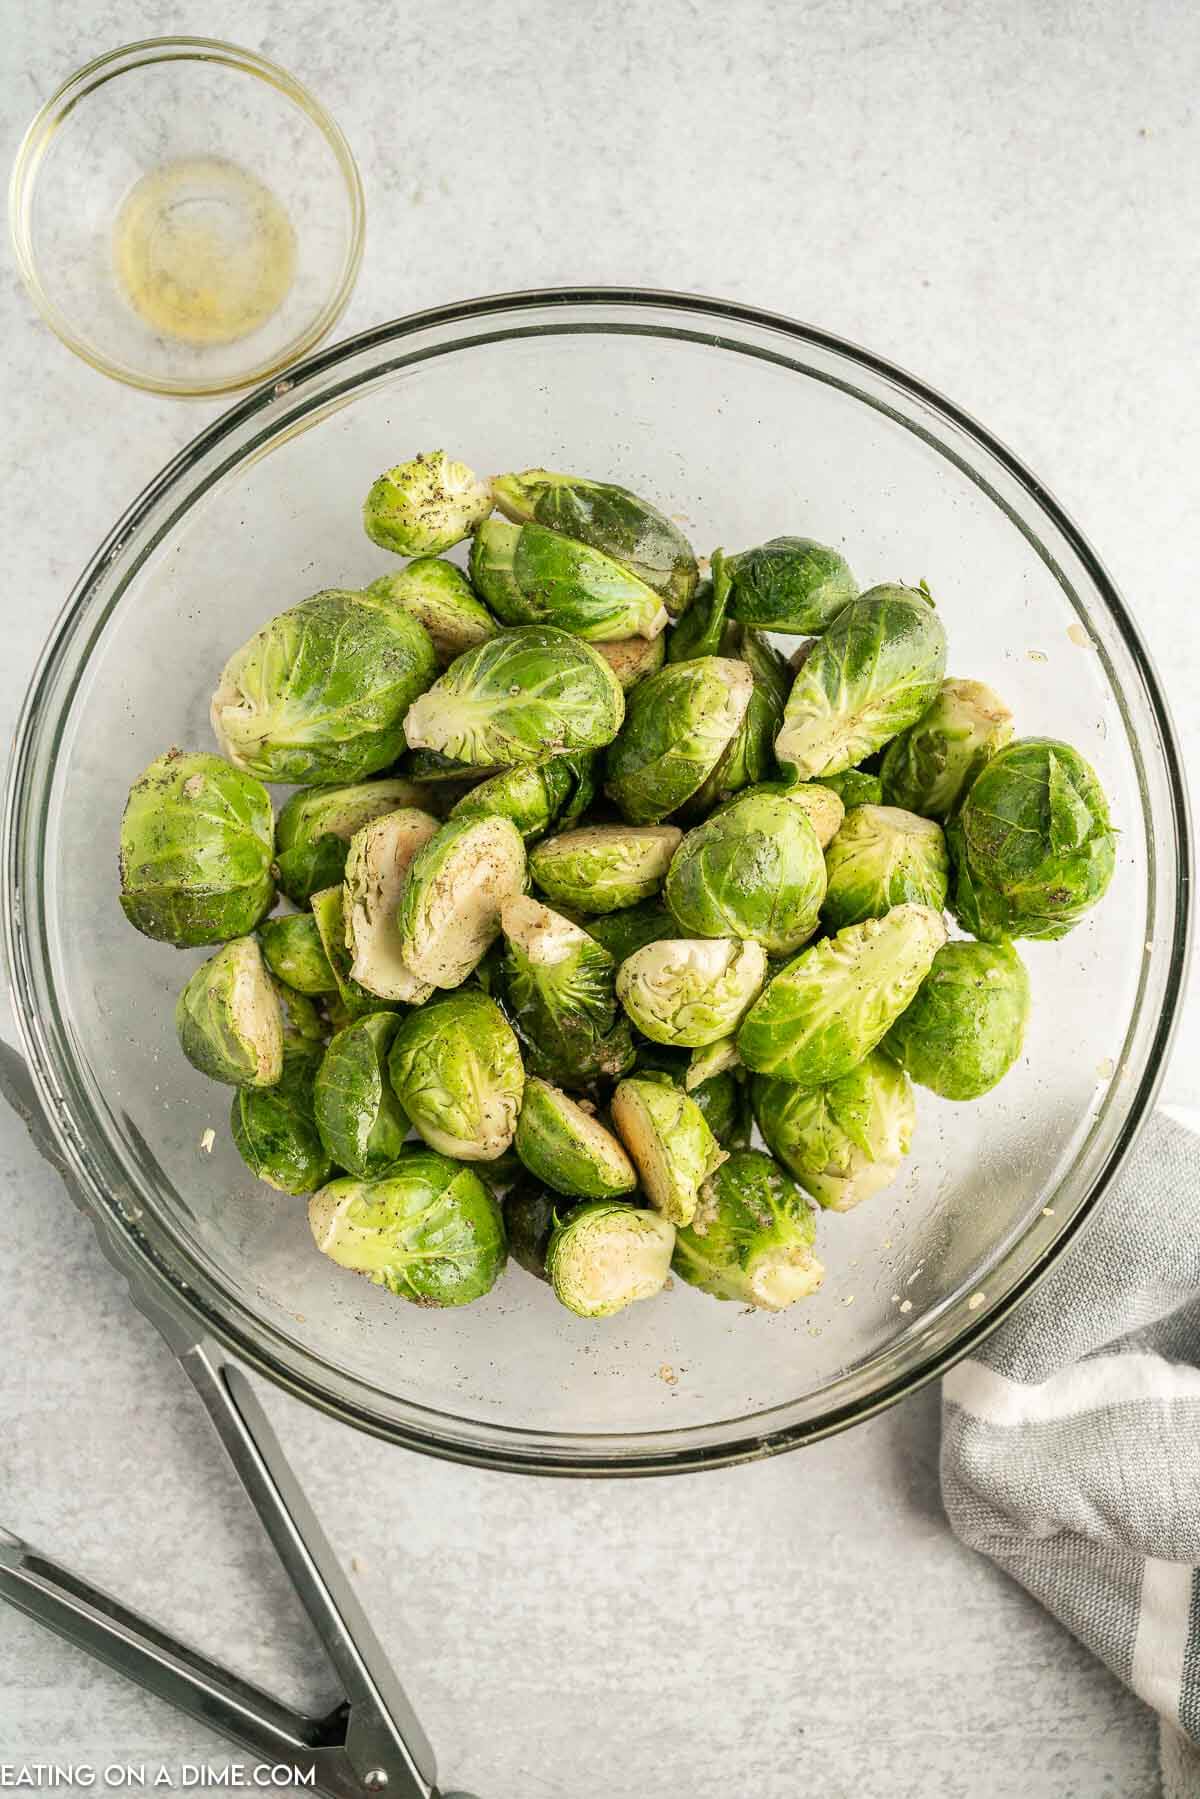 Mixing the brussel sprouts in a bowl with seasoning